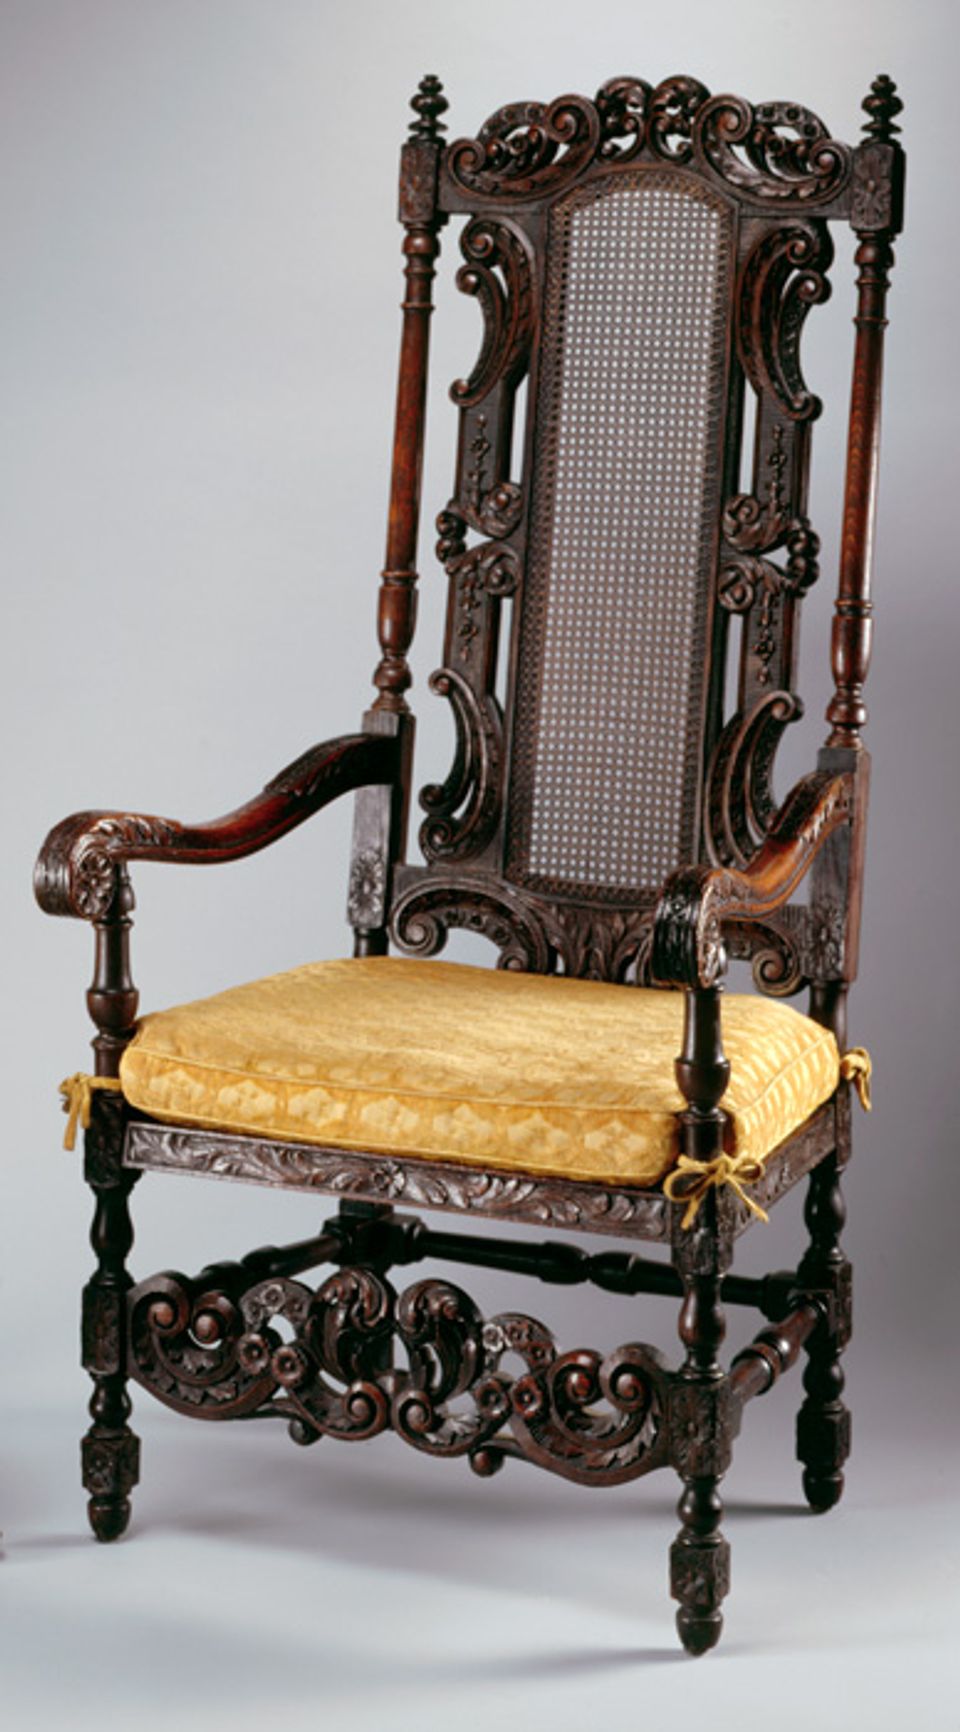 An image of Davenport's white oak and cane armchair with yellow seat cushion.